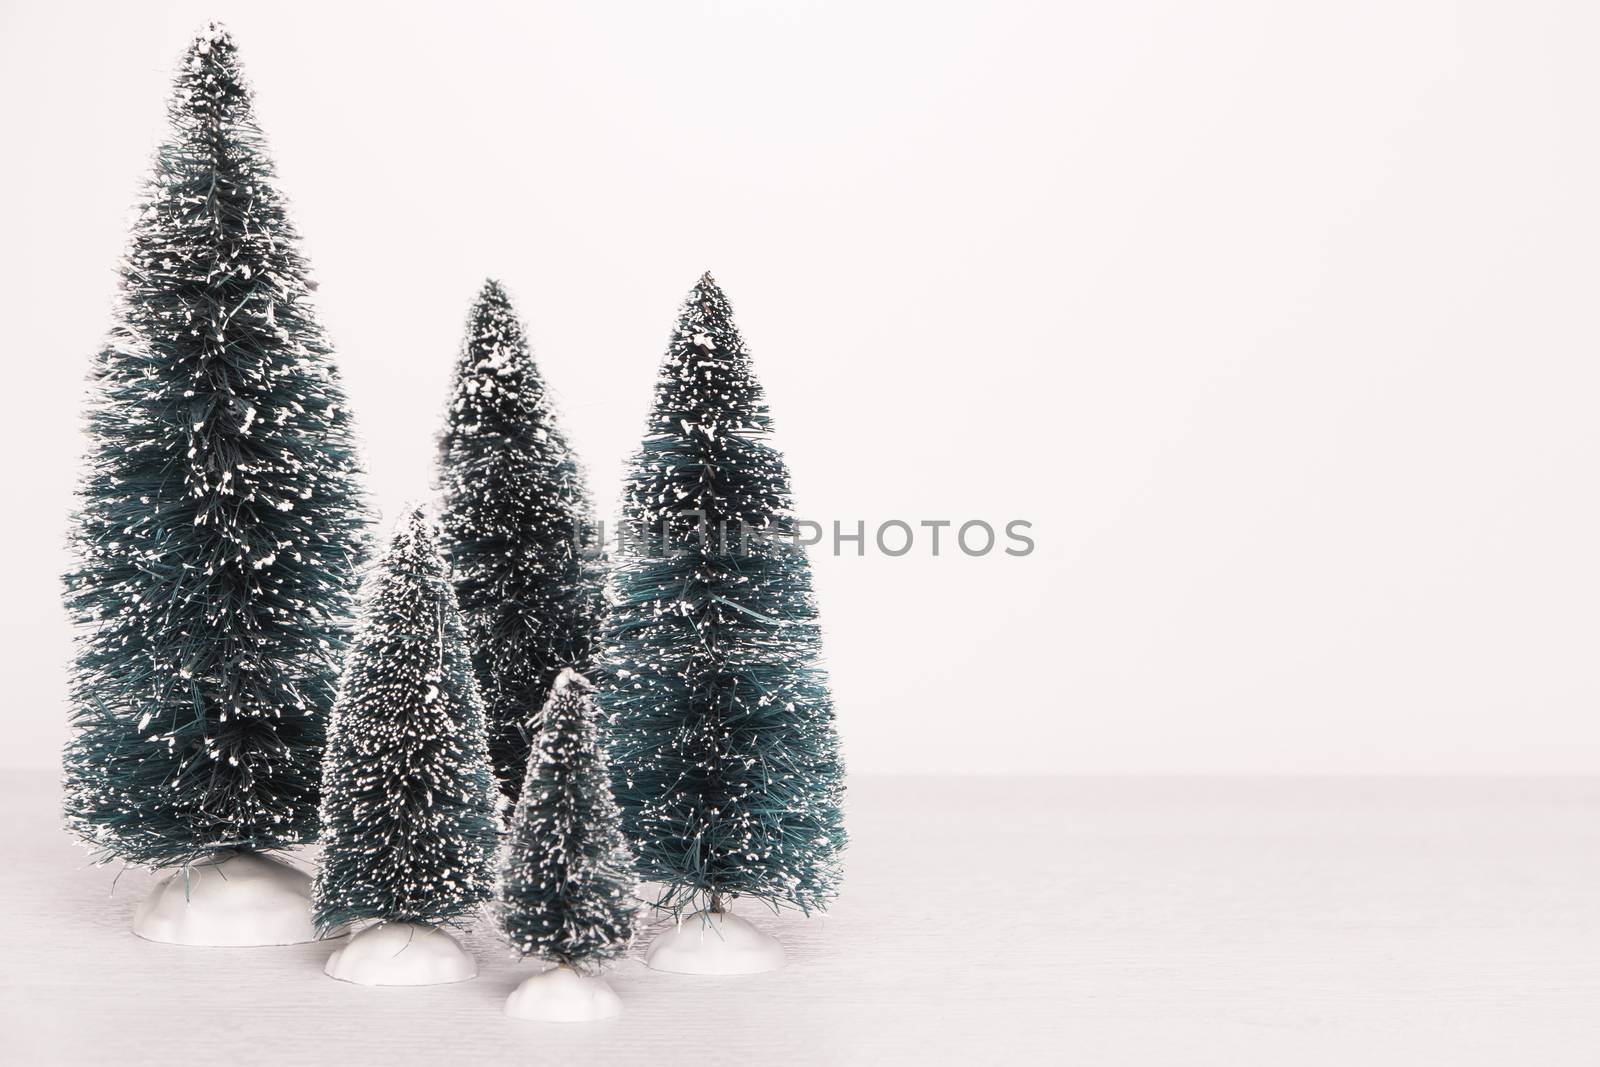 Miniature evergreen trees by AnaMarques